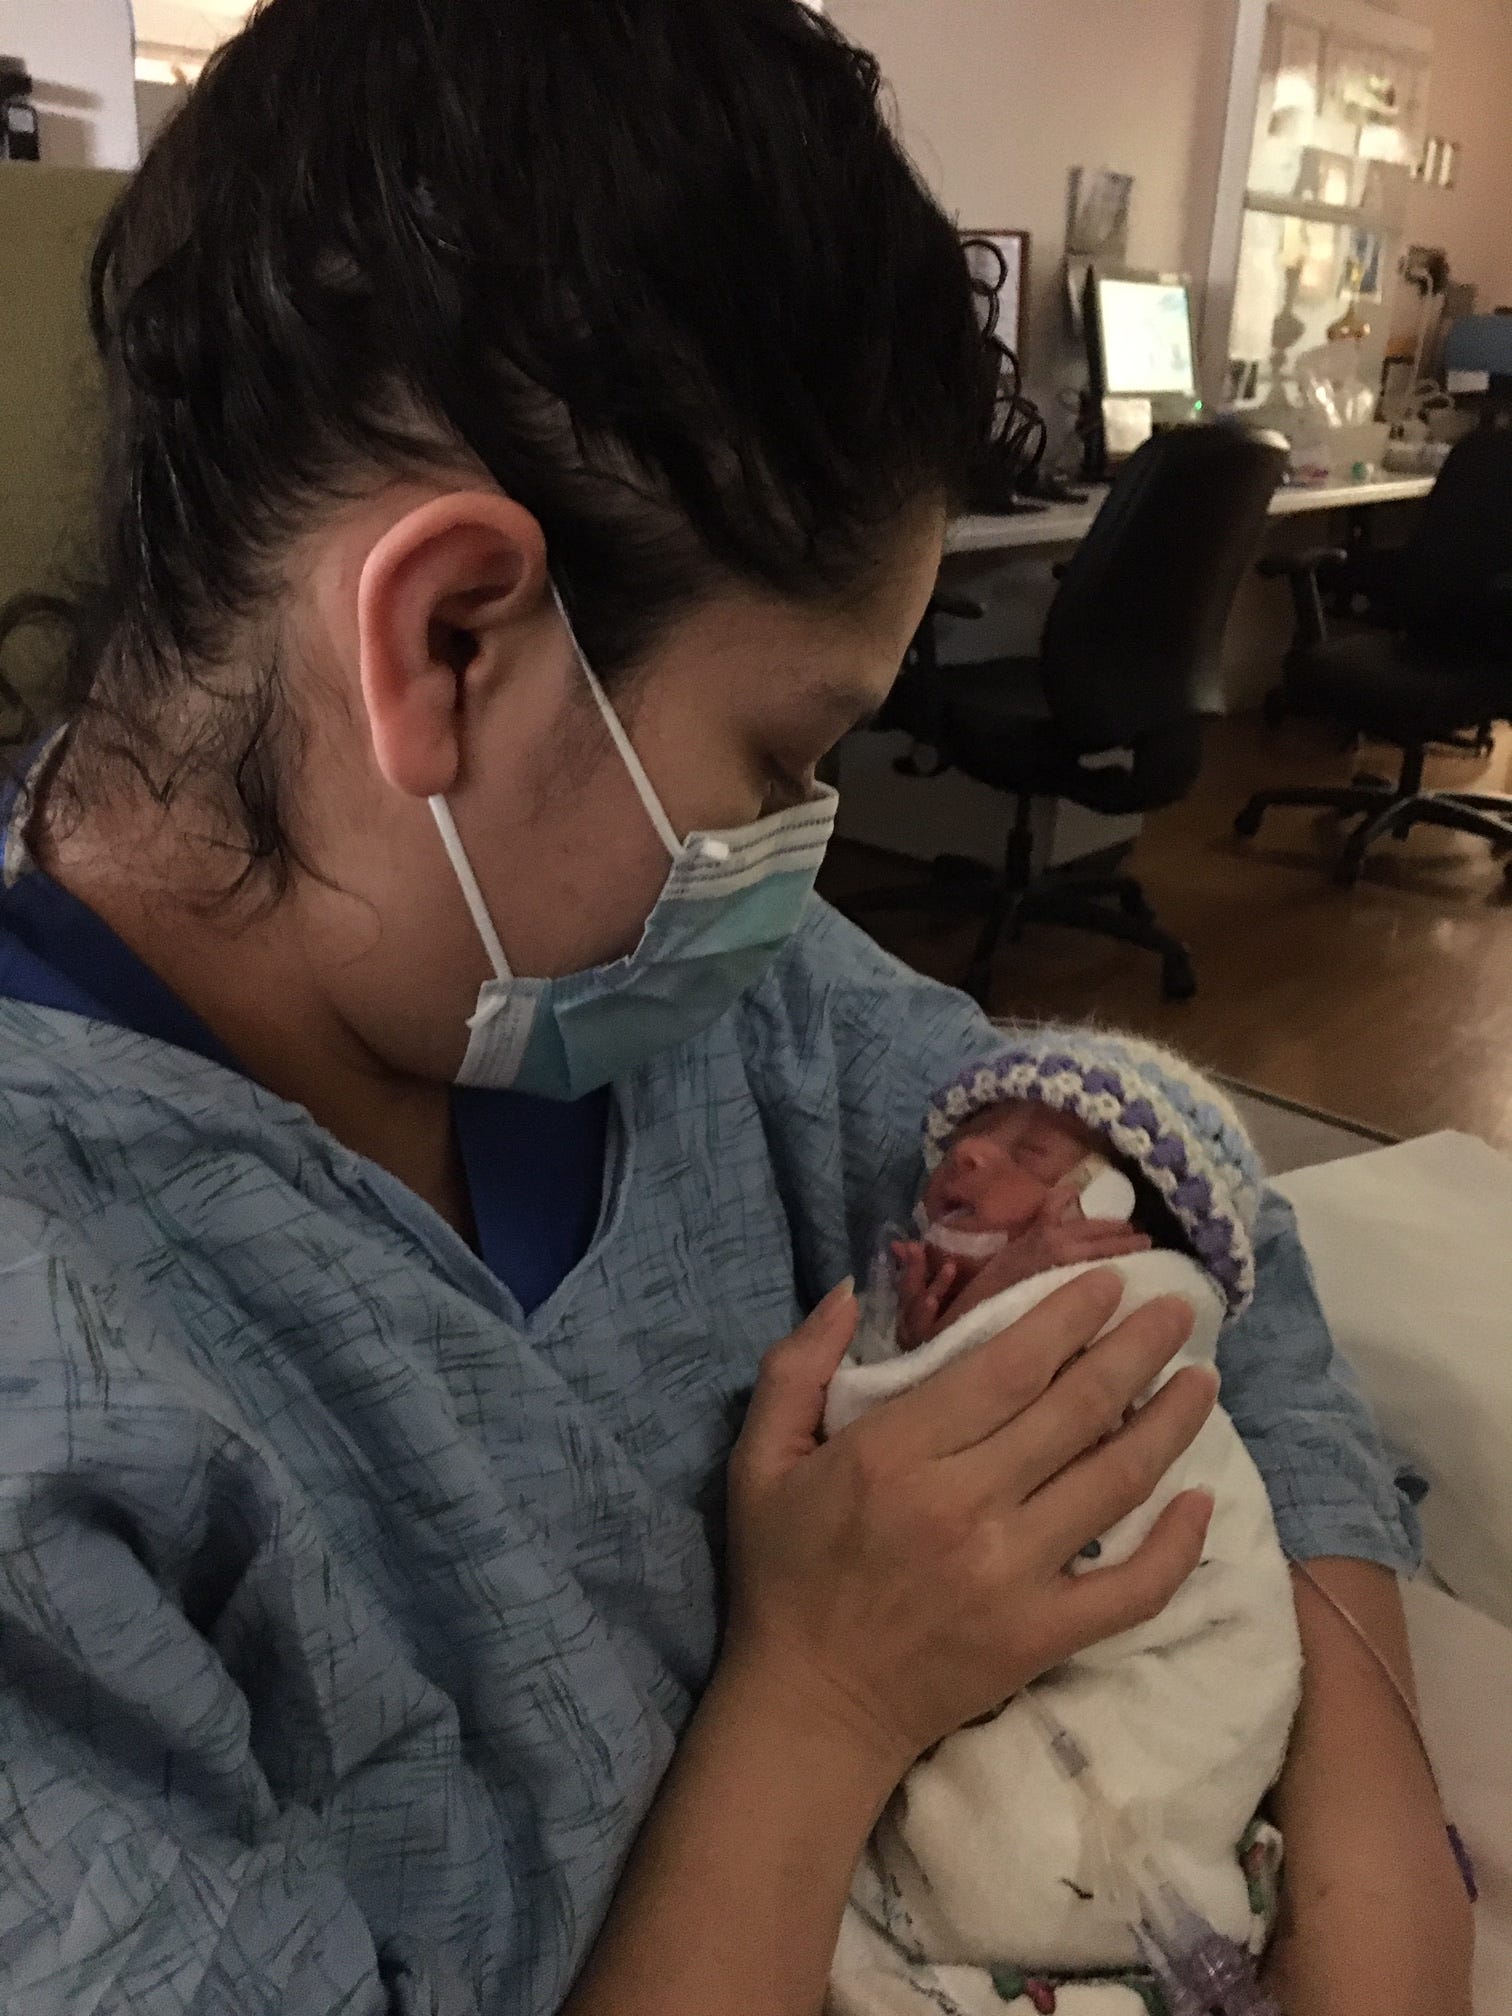 On May 11, 2020, Cyndi Nava holds her daughter, Ellie Camacho, for the first time since giving birth to her on April 19, 2020.